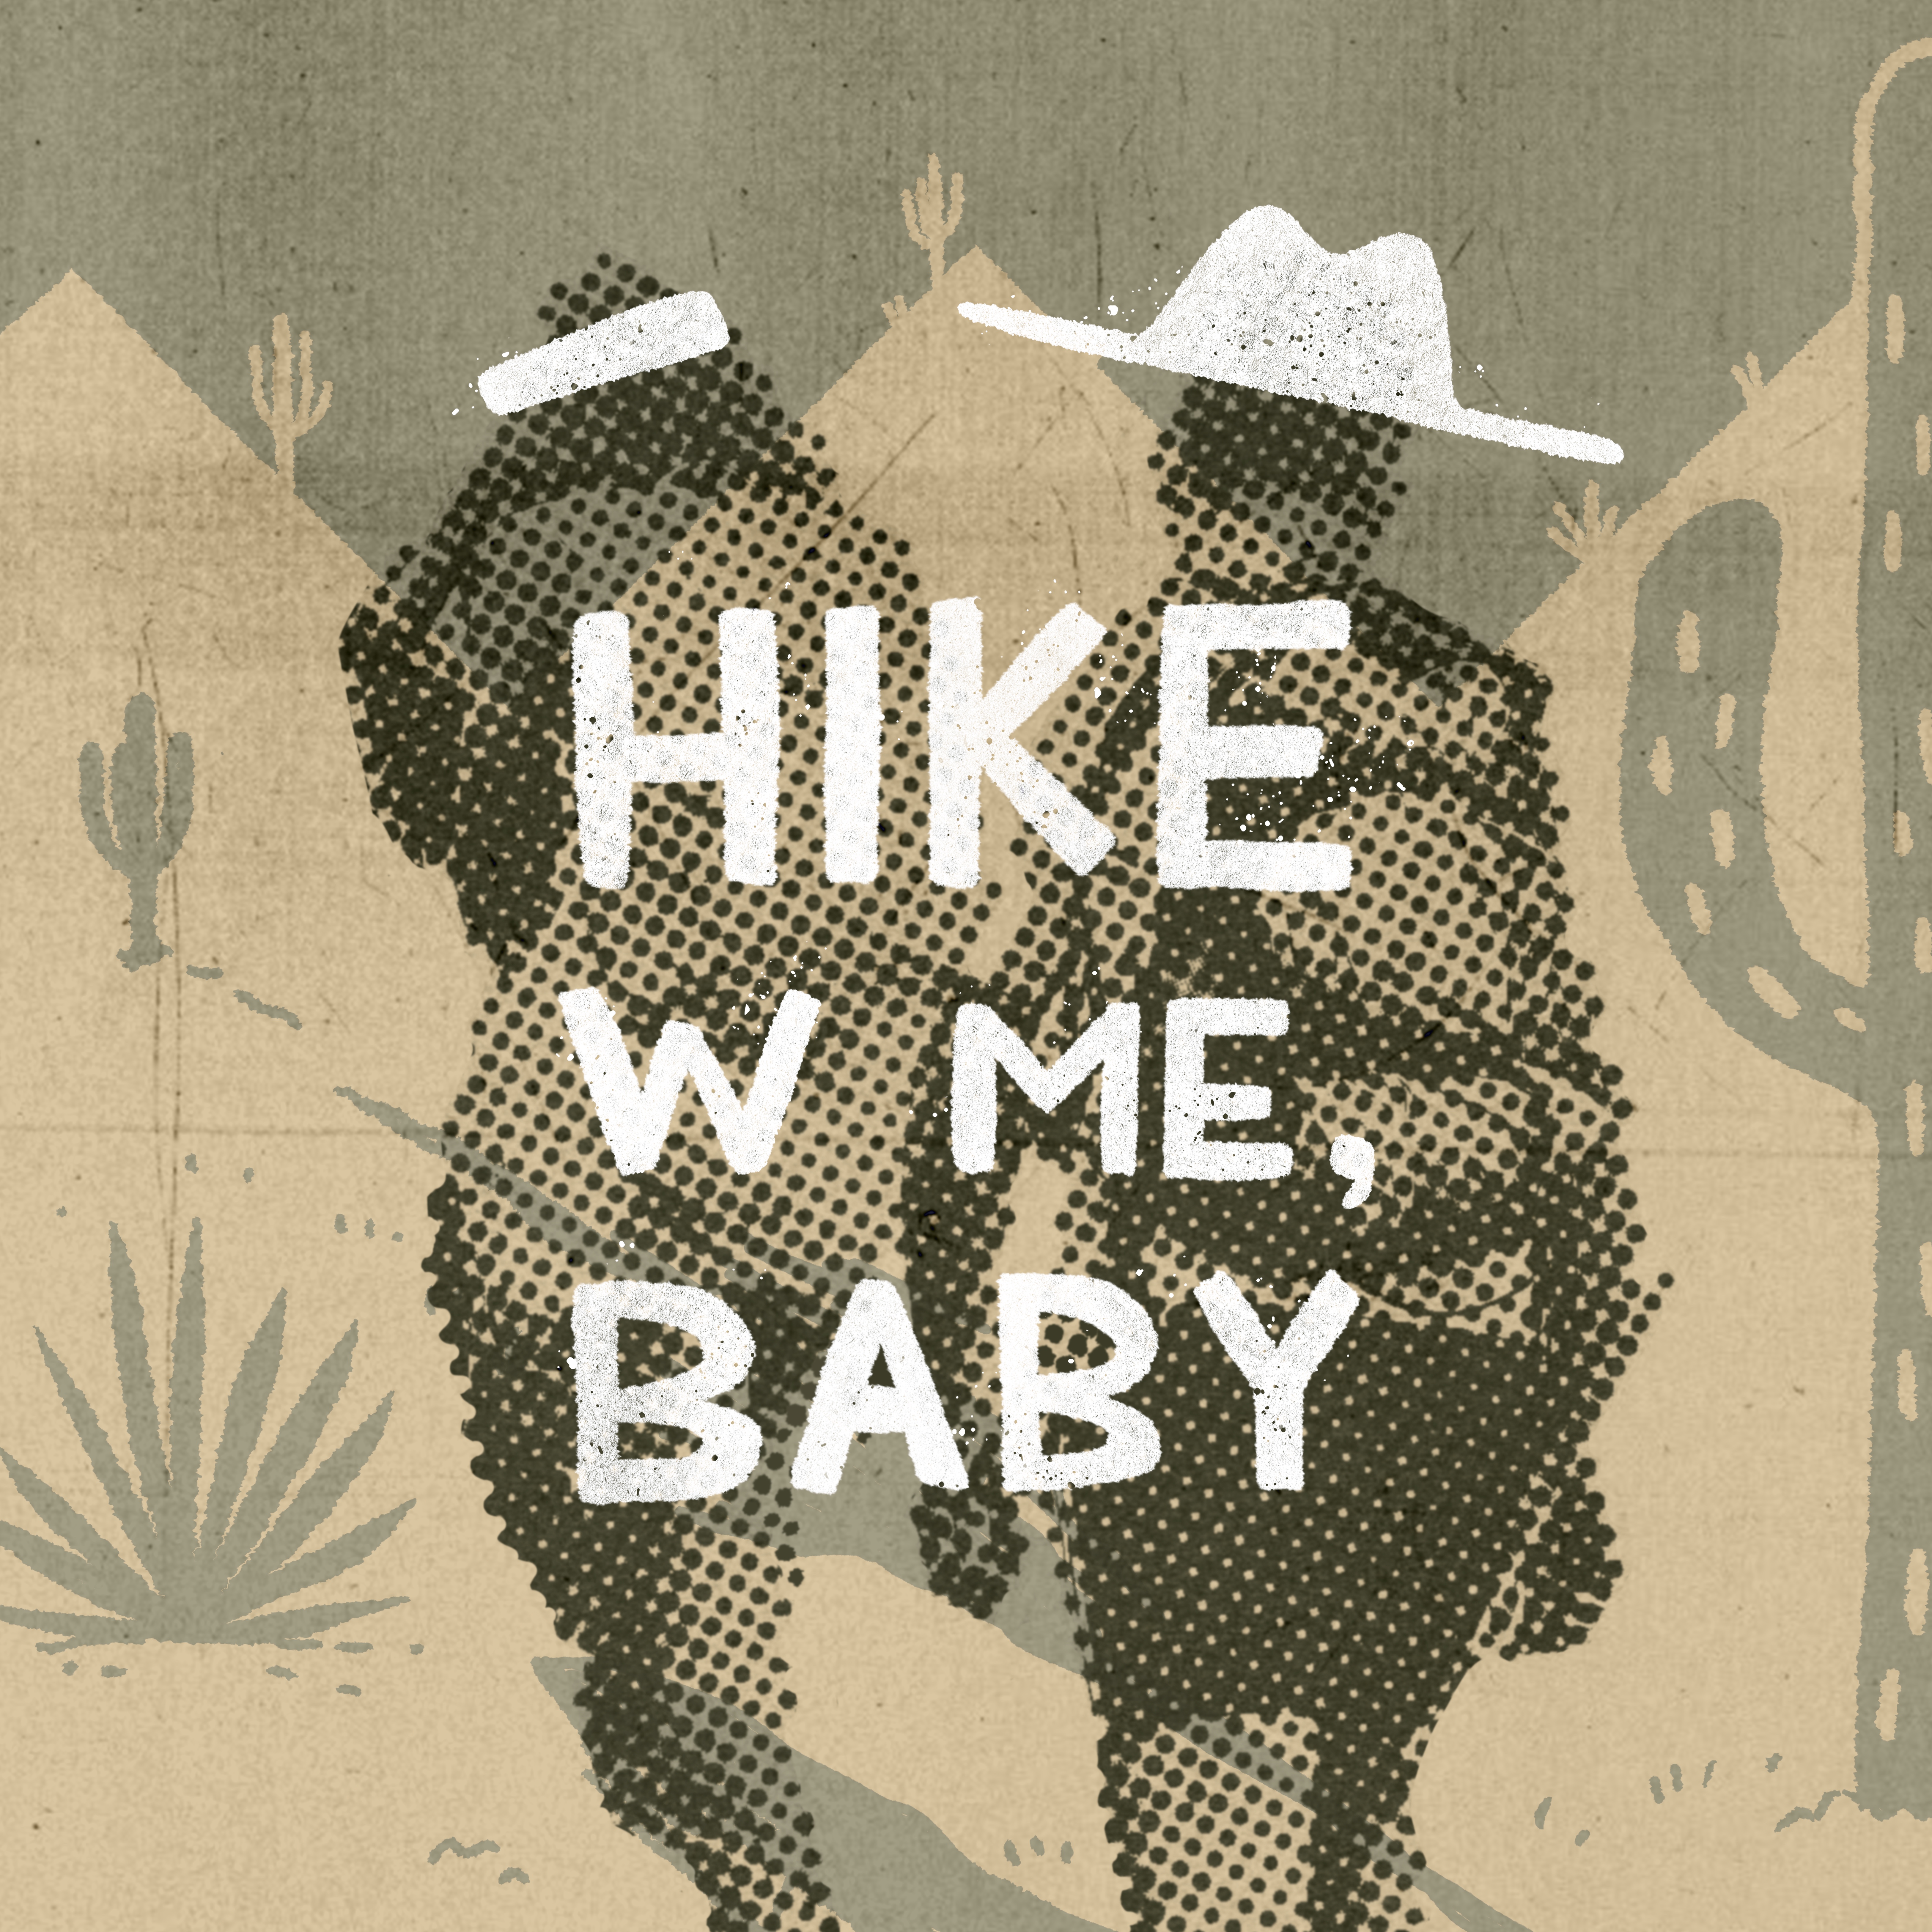 Hike With Me, Baby